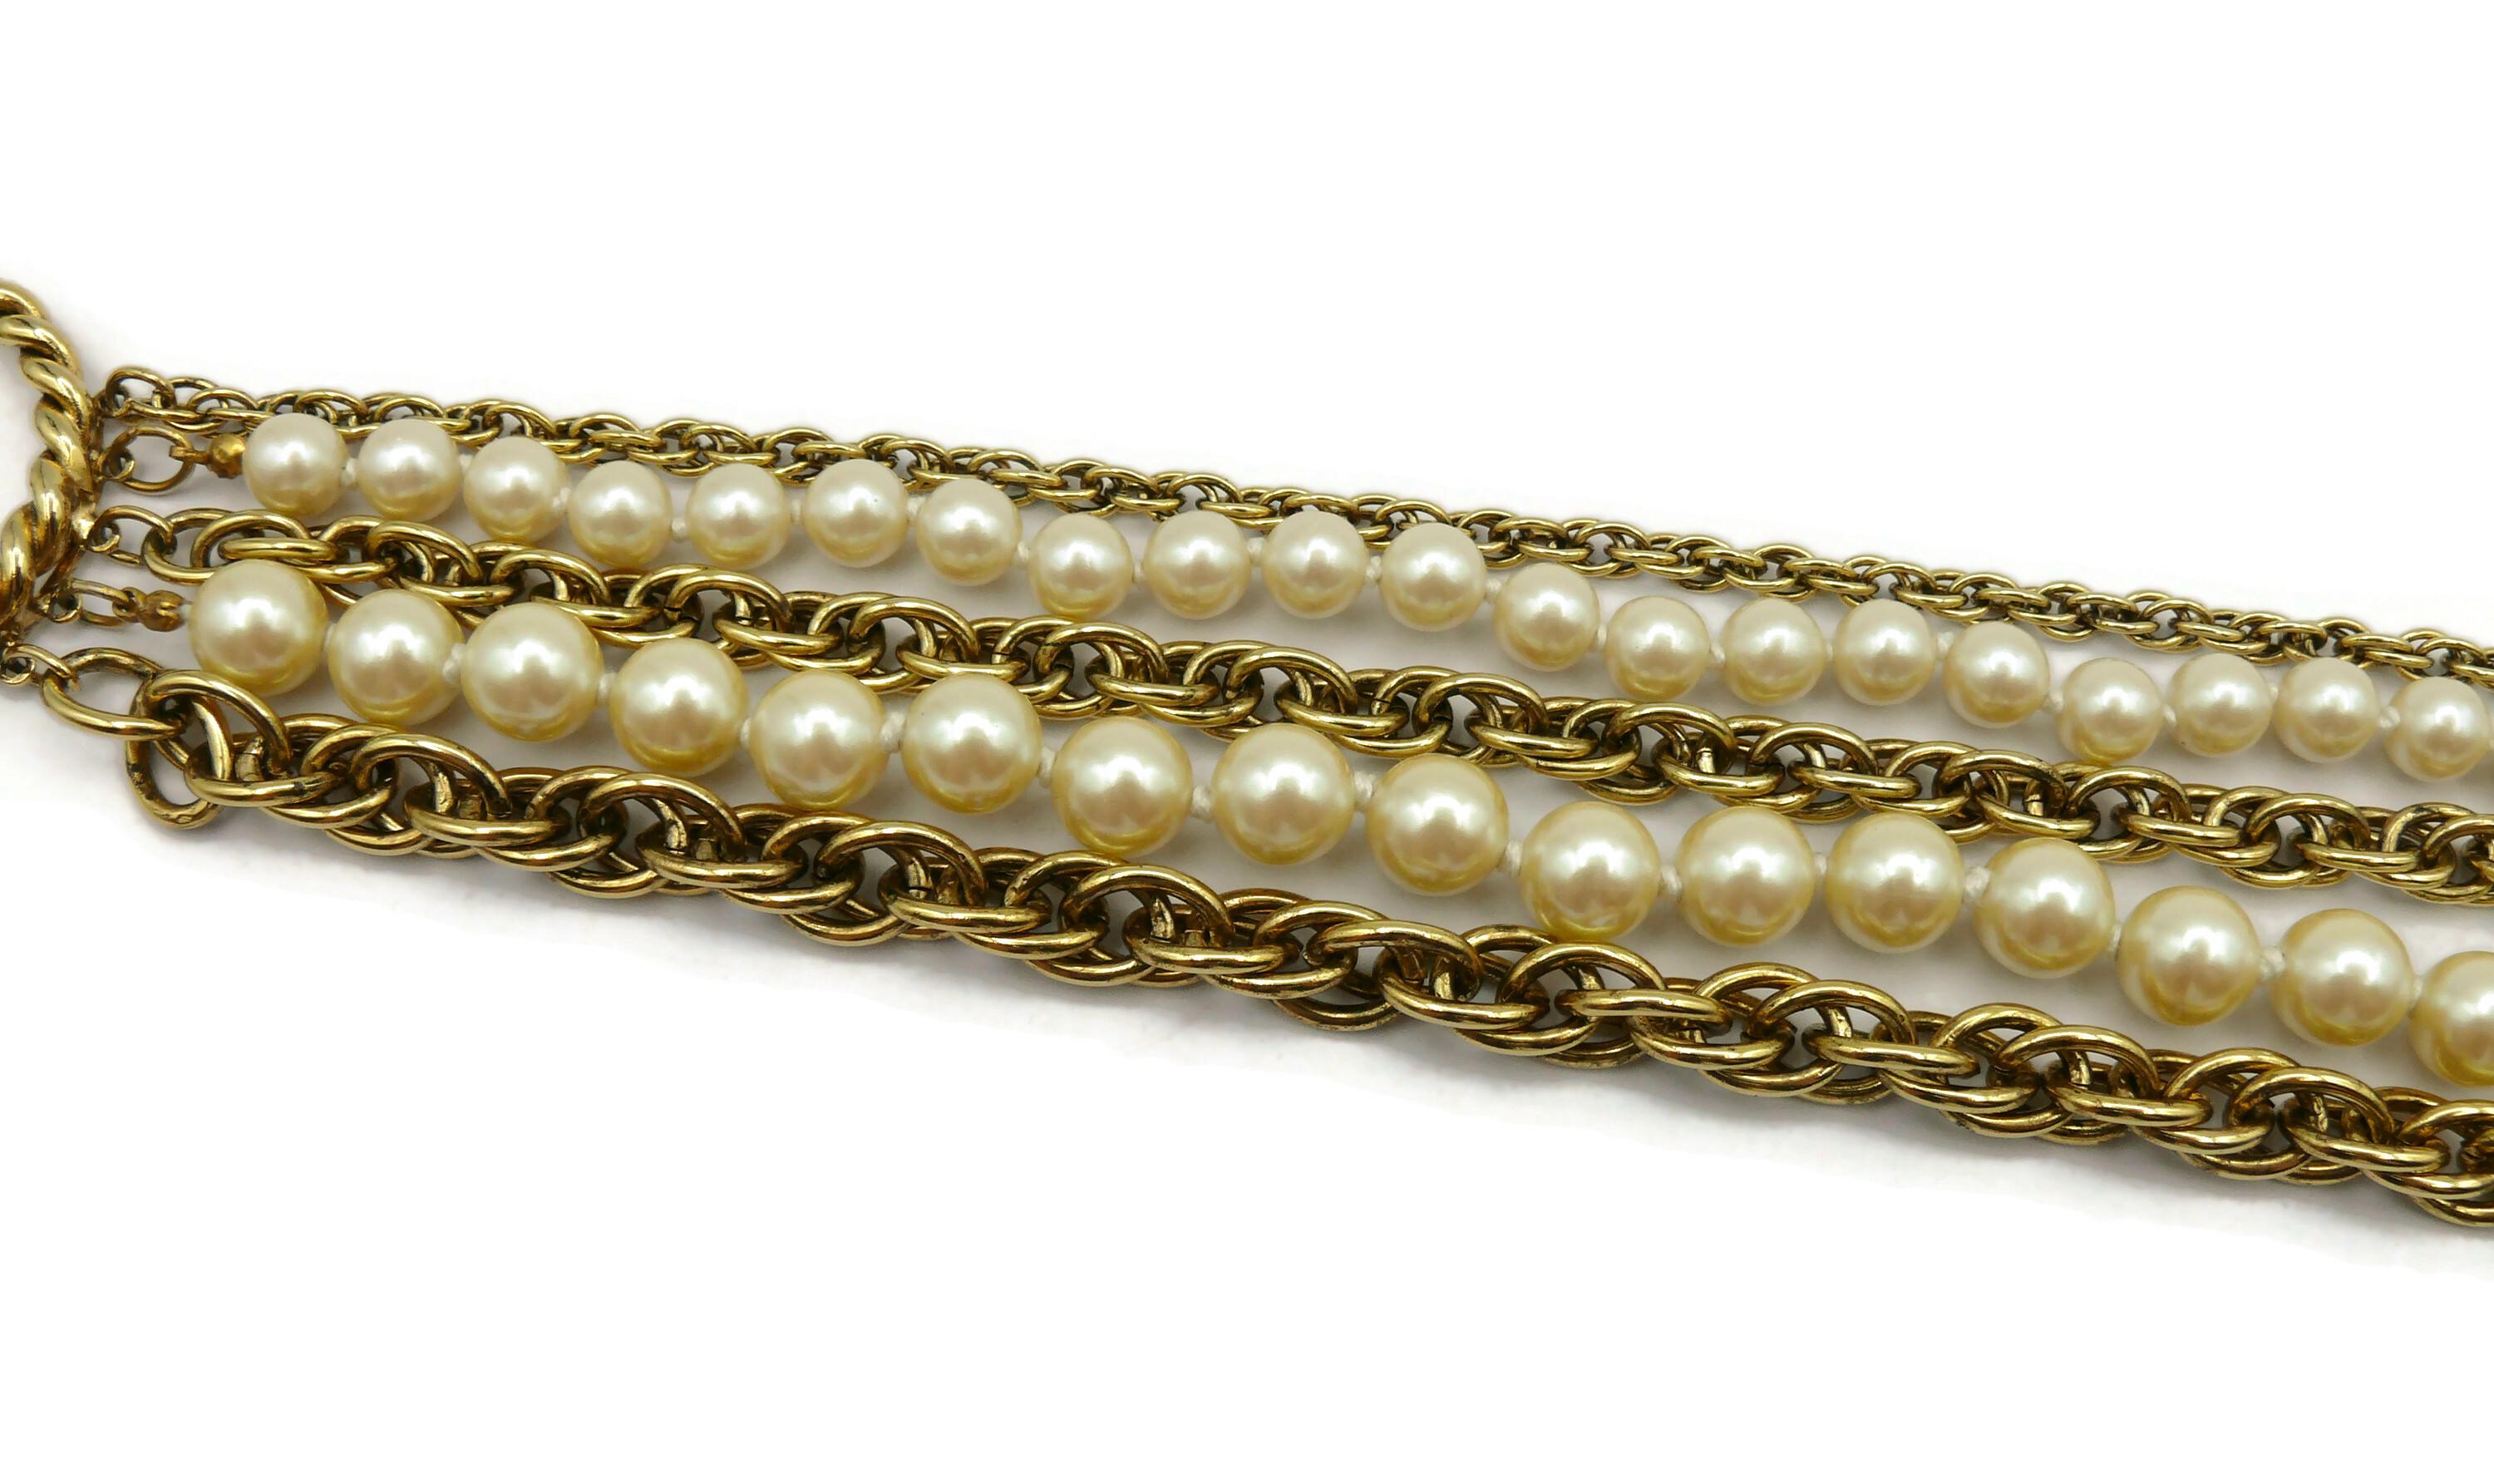 MOSCHINO Vintage Multi-Strand Gold Tone Chain & Pearl Necklace For Sale 1